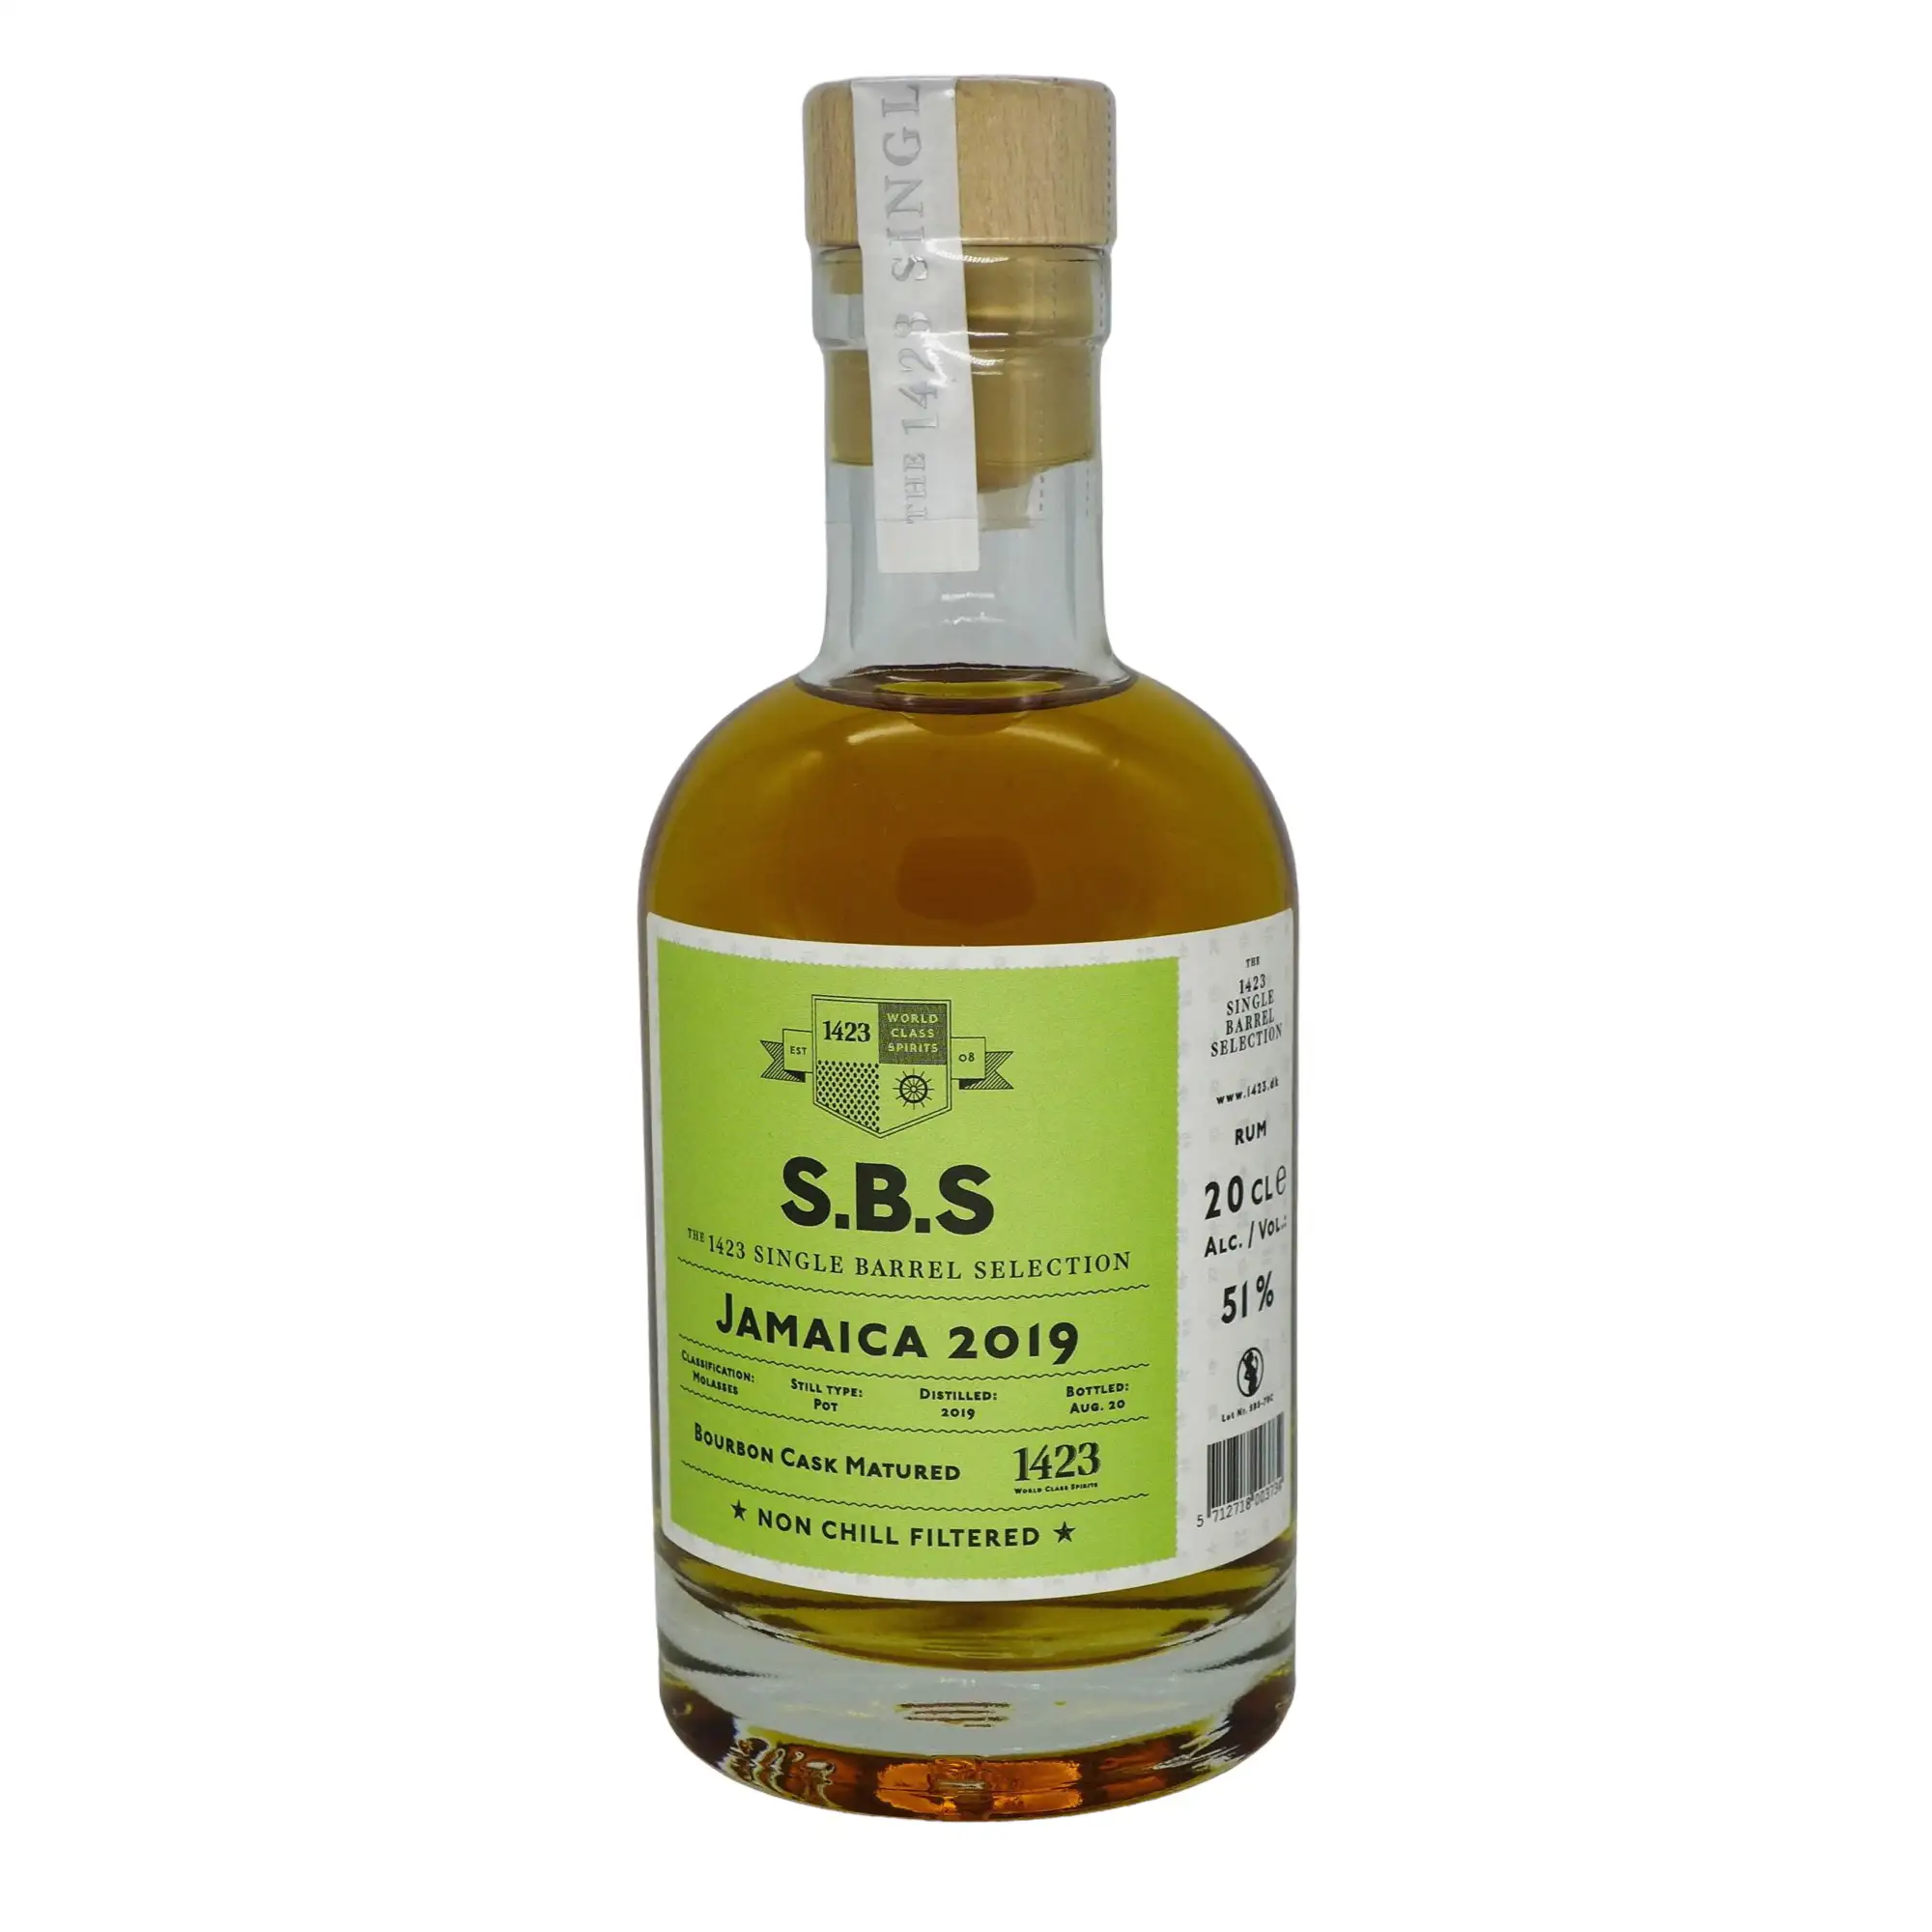 Image of the front of the bottle of the rum S.B.S Jamaica 2019 - Bourbon Cask Matured (DOK) DOK